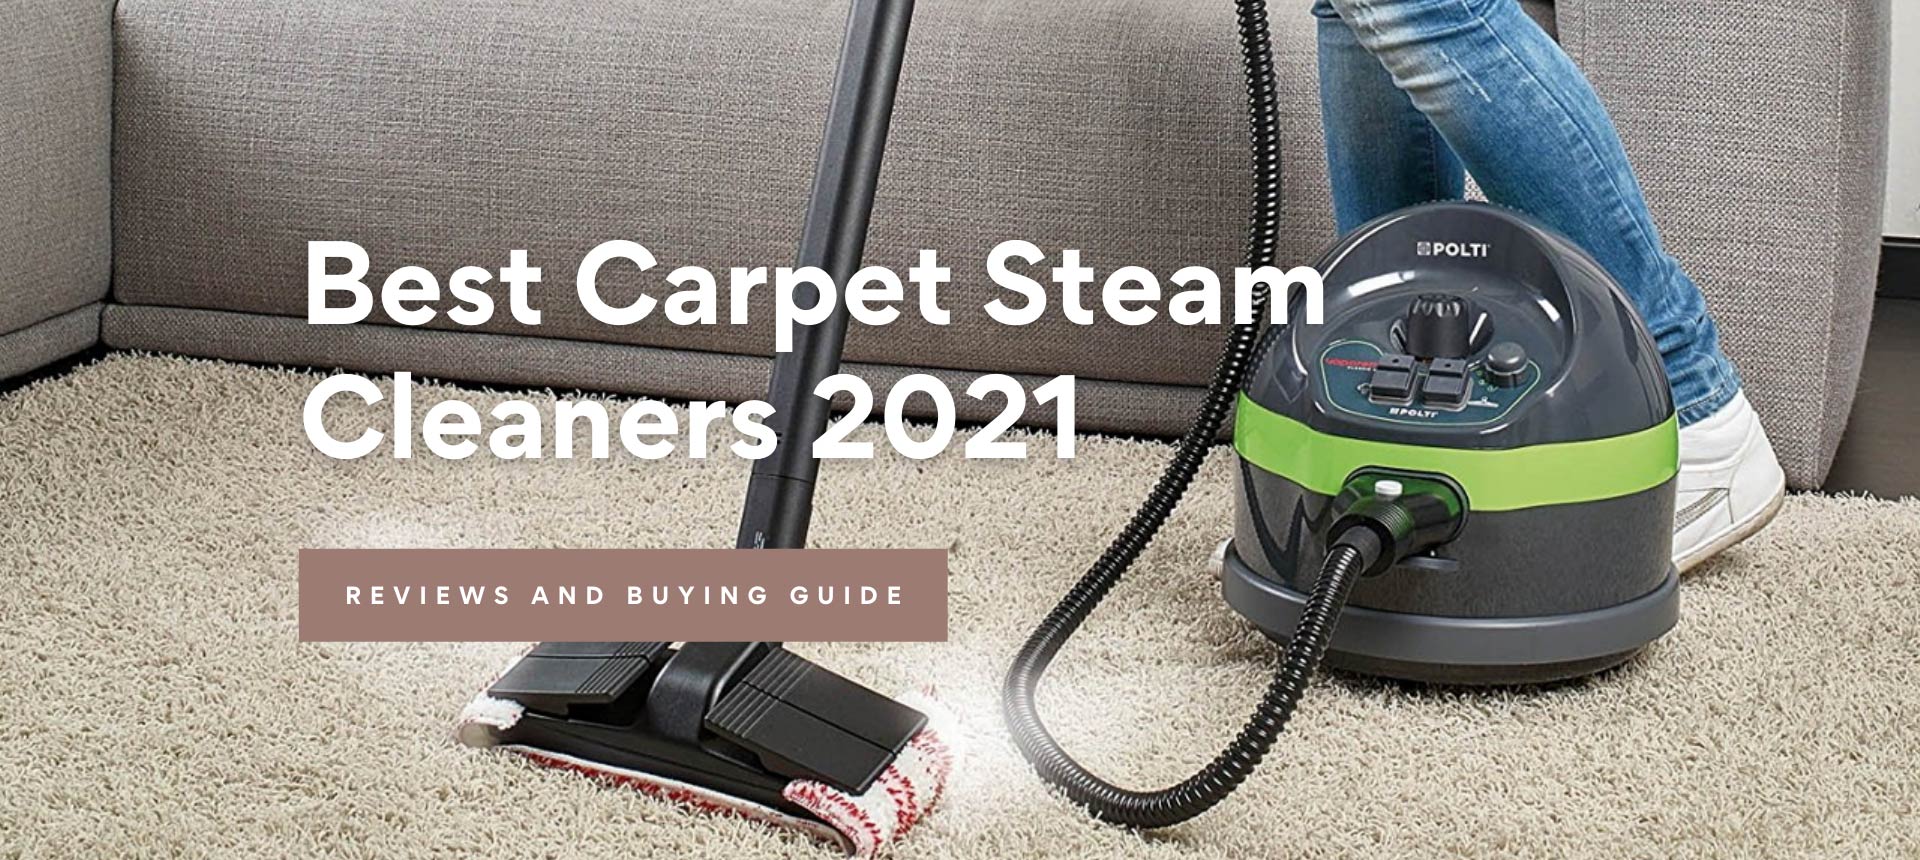 Best Carpet Steam Cleaners 2021